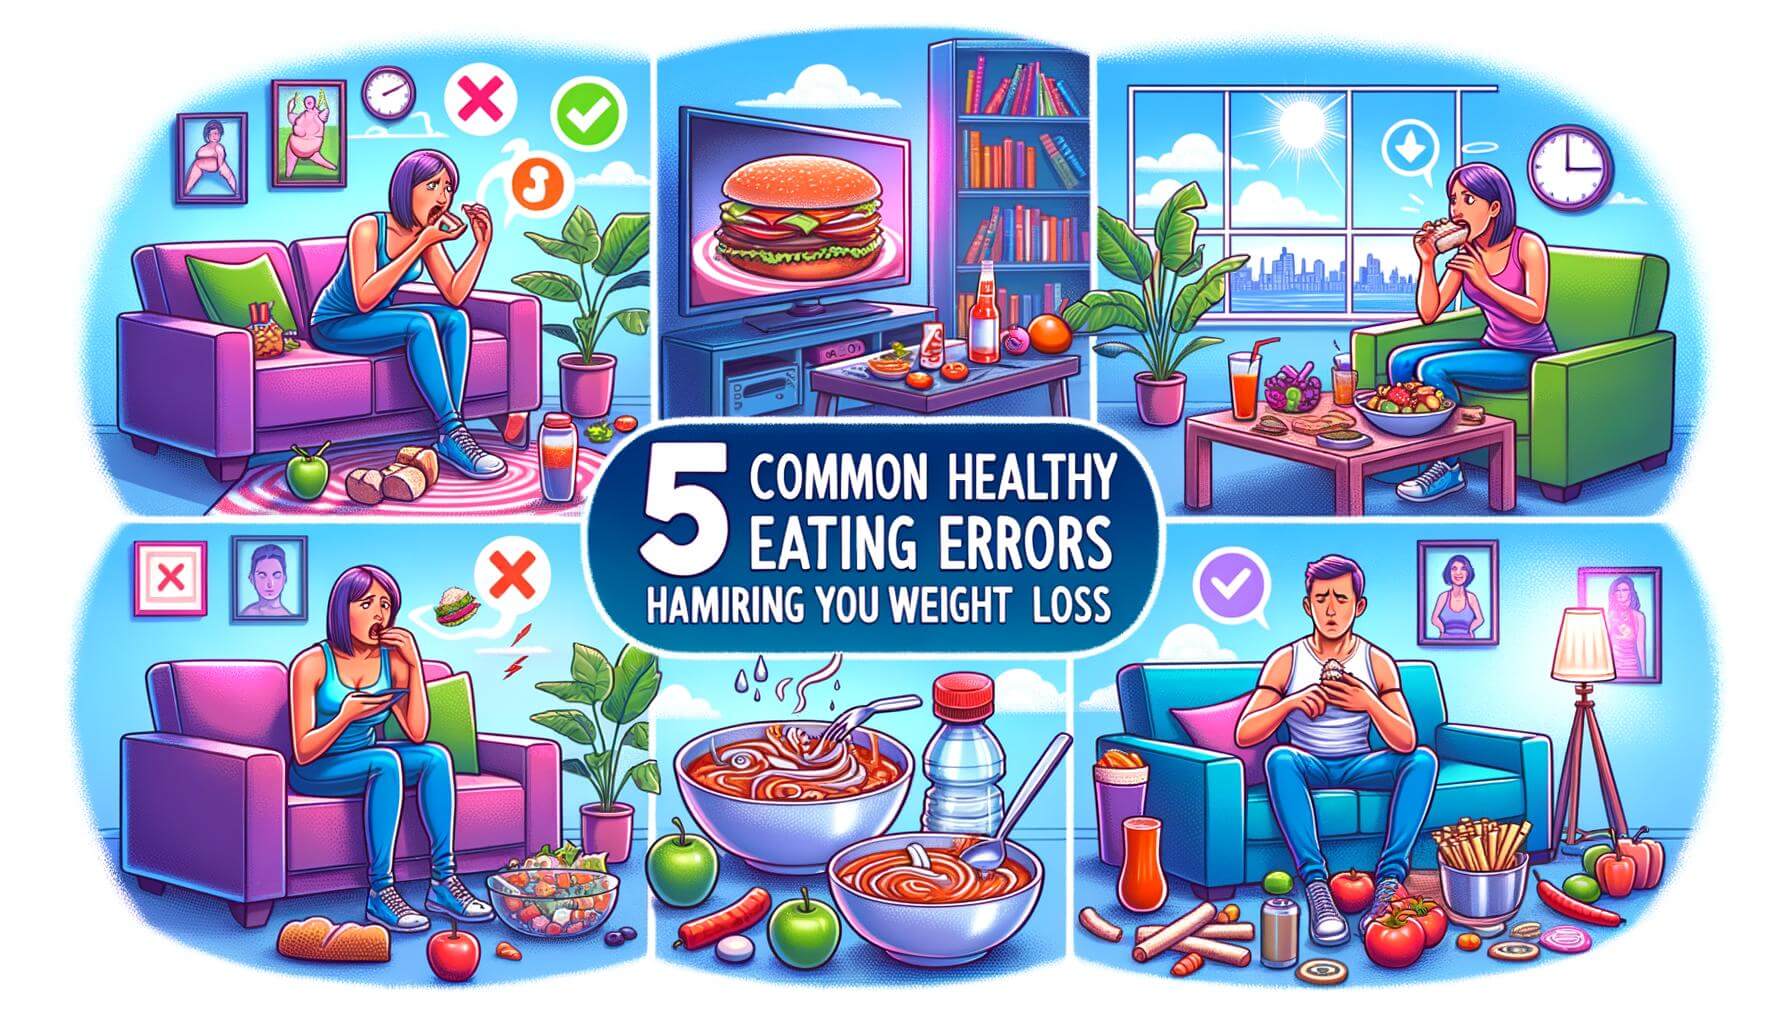 5 Common Healthy Eating Errors Hampering Your Weight Loss